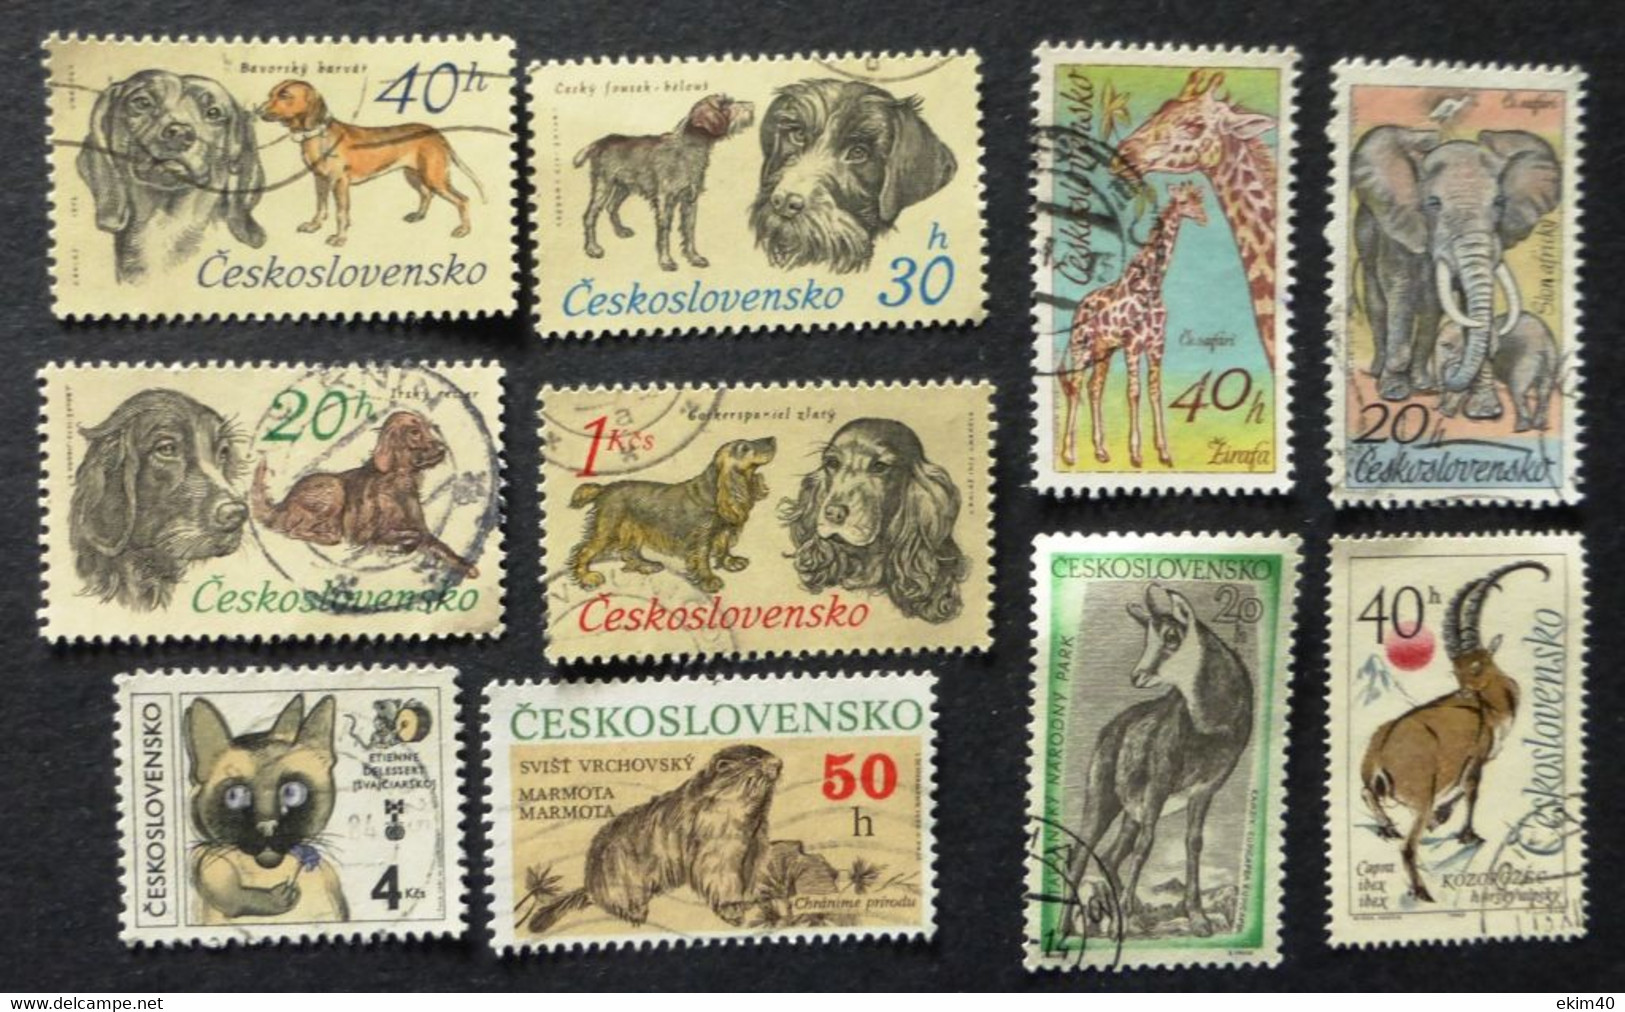 Selection Of Used/Cancelled Stamps From Czechoslovakia Wild & Domestic Animals. No DC-323 - Usati